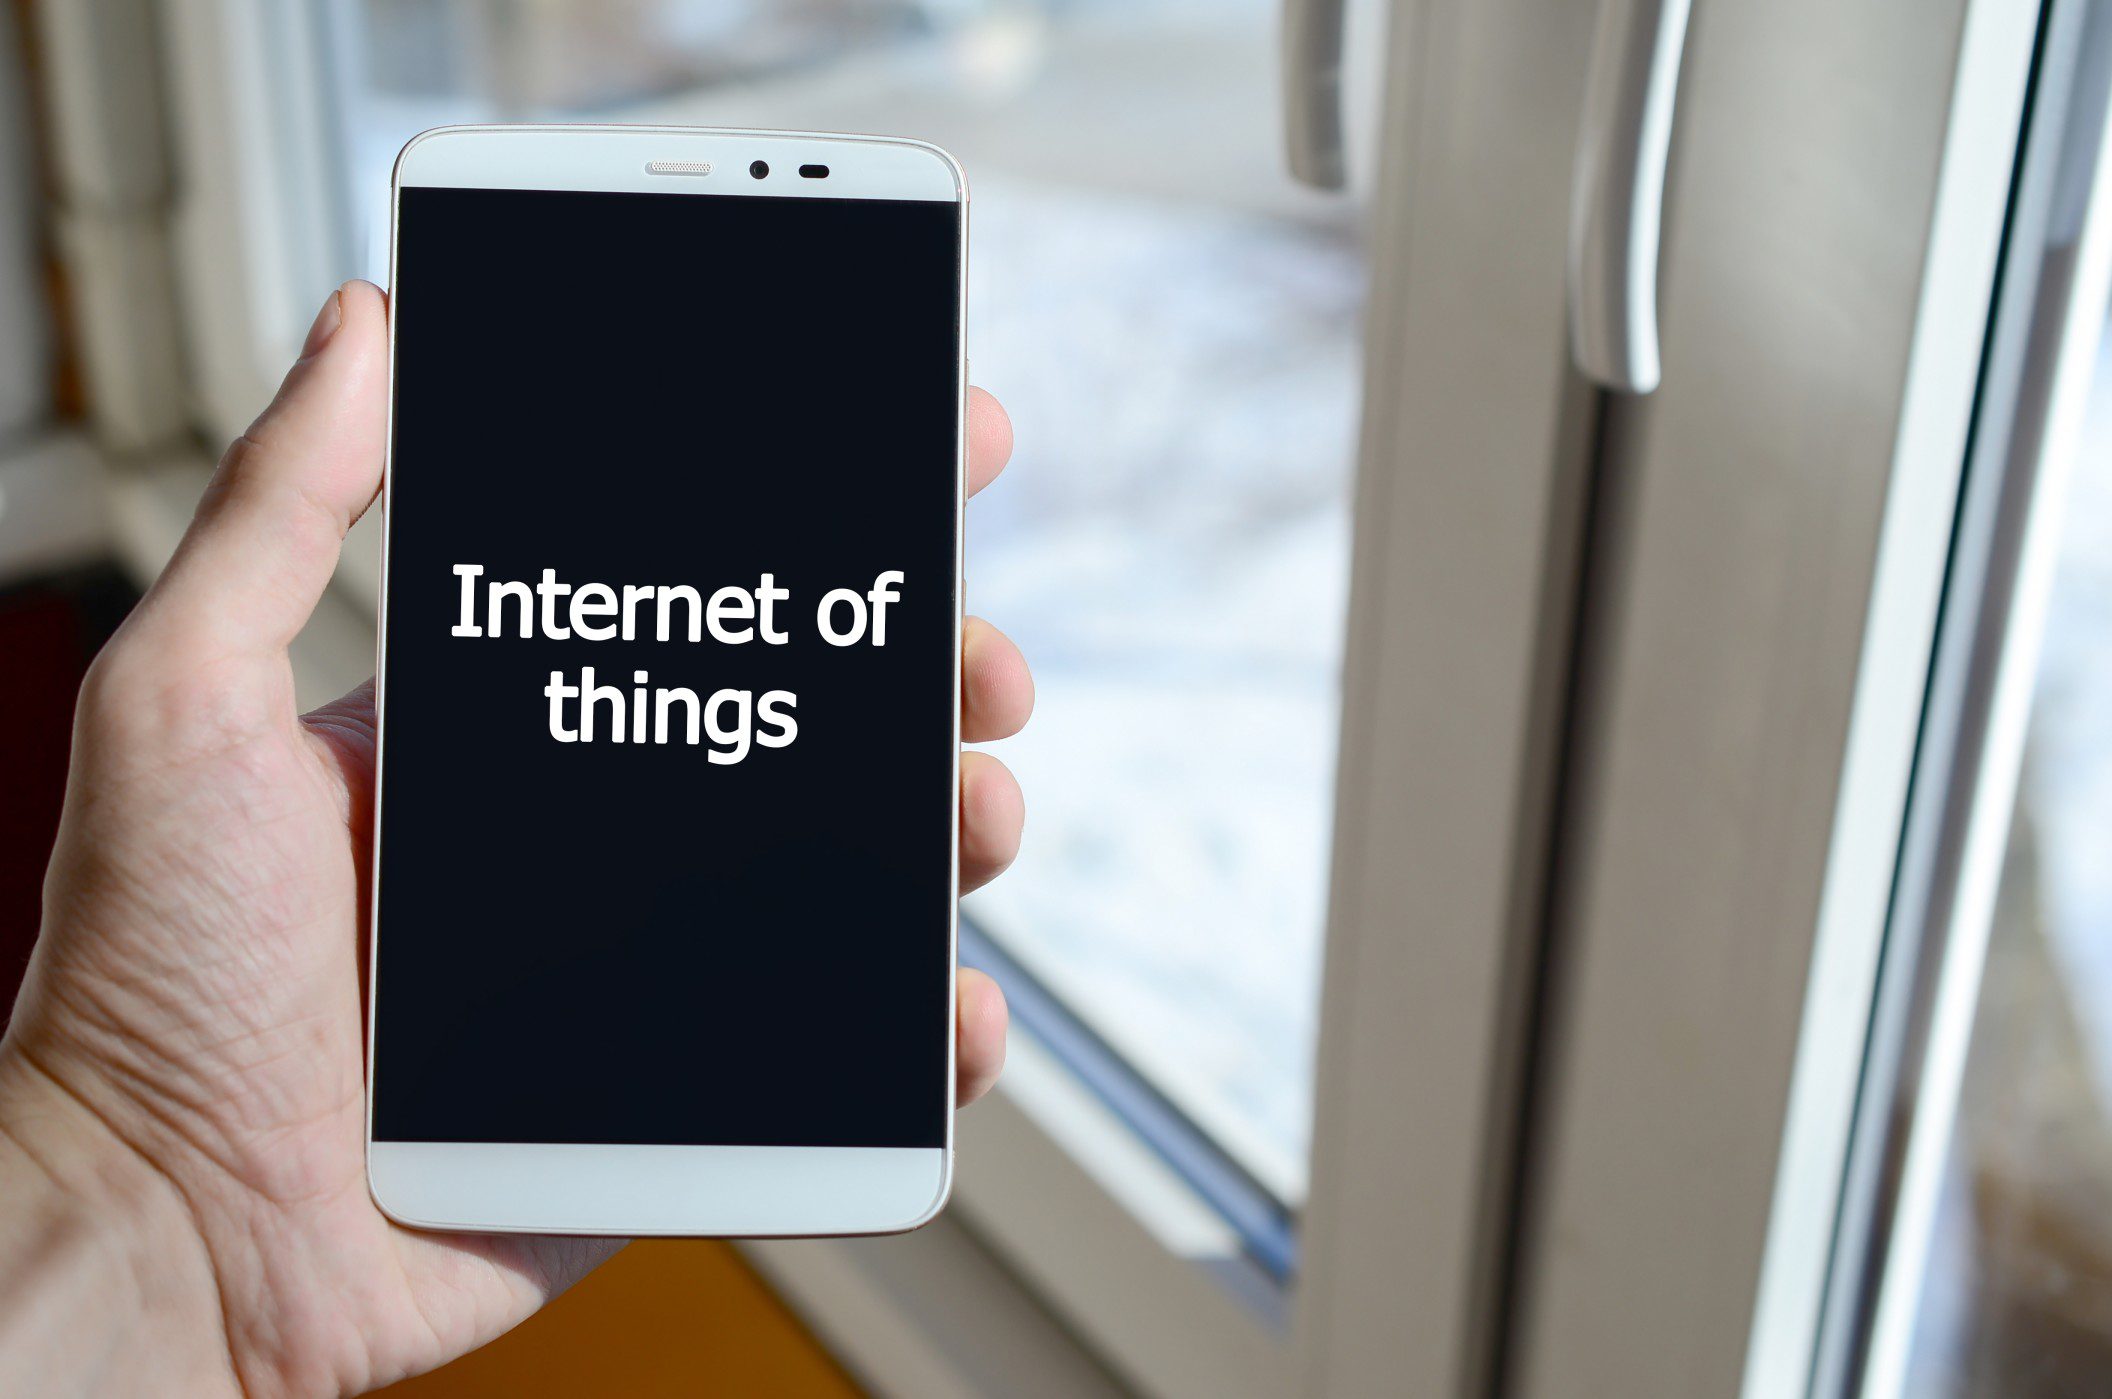 How Your Business Can Benefit from the IoT (Internet of Things)